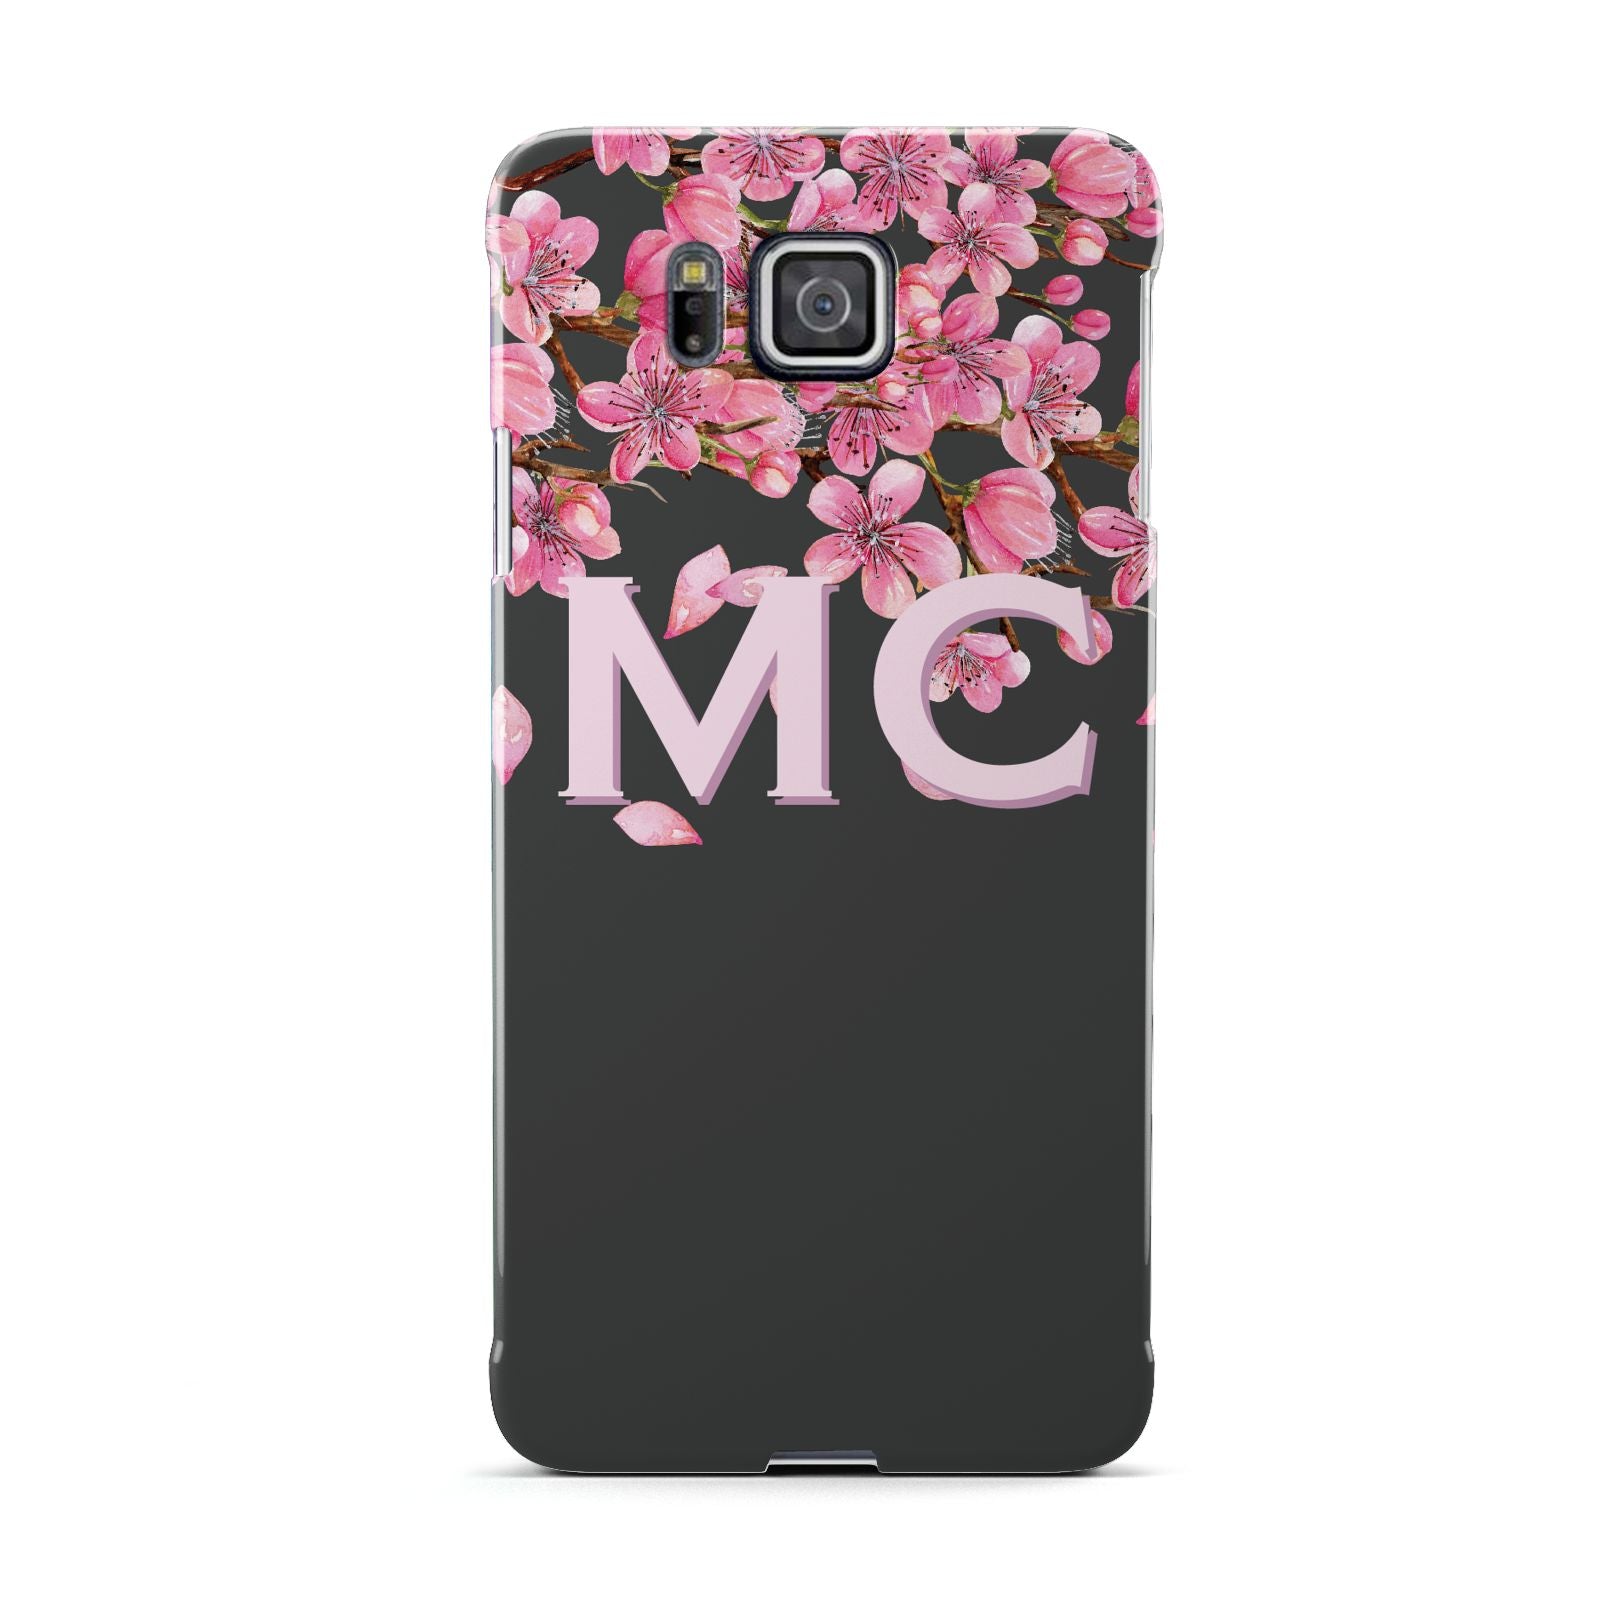 Personalised Floral Blossom Black Pink Samsung Galaxy Alpha Case